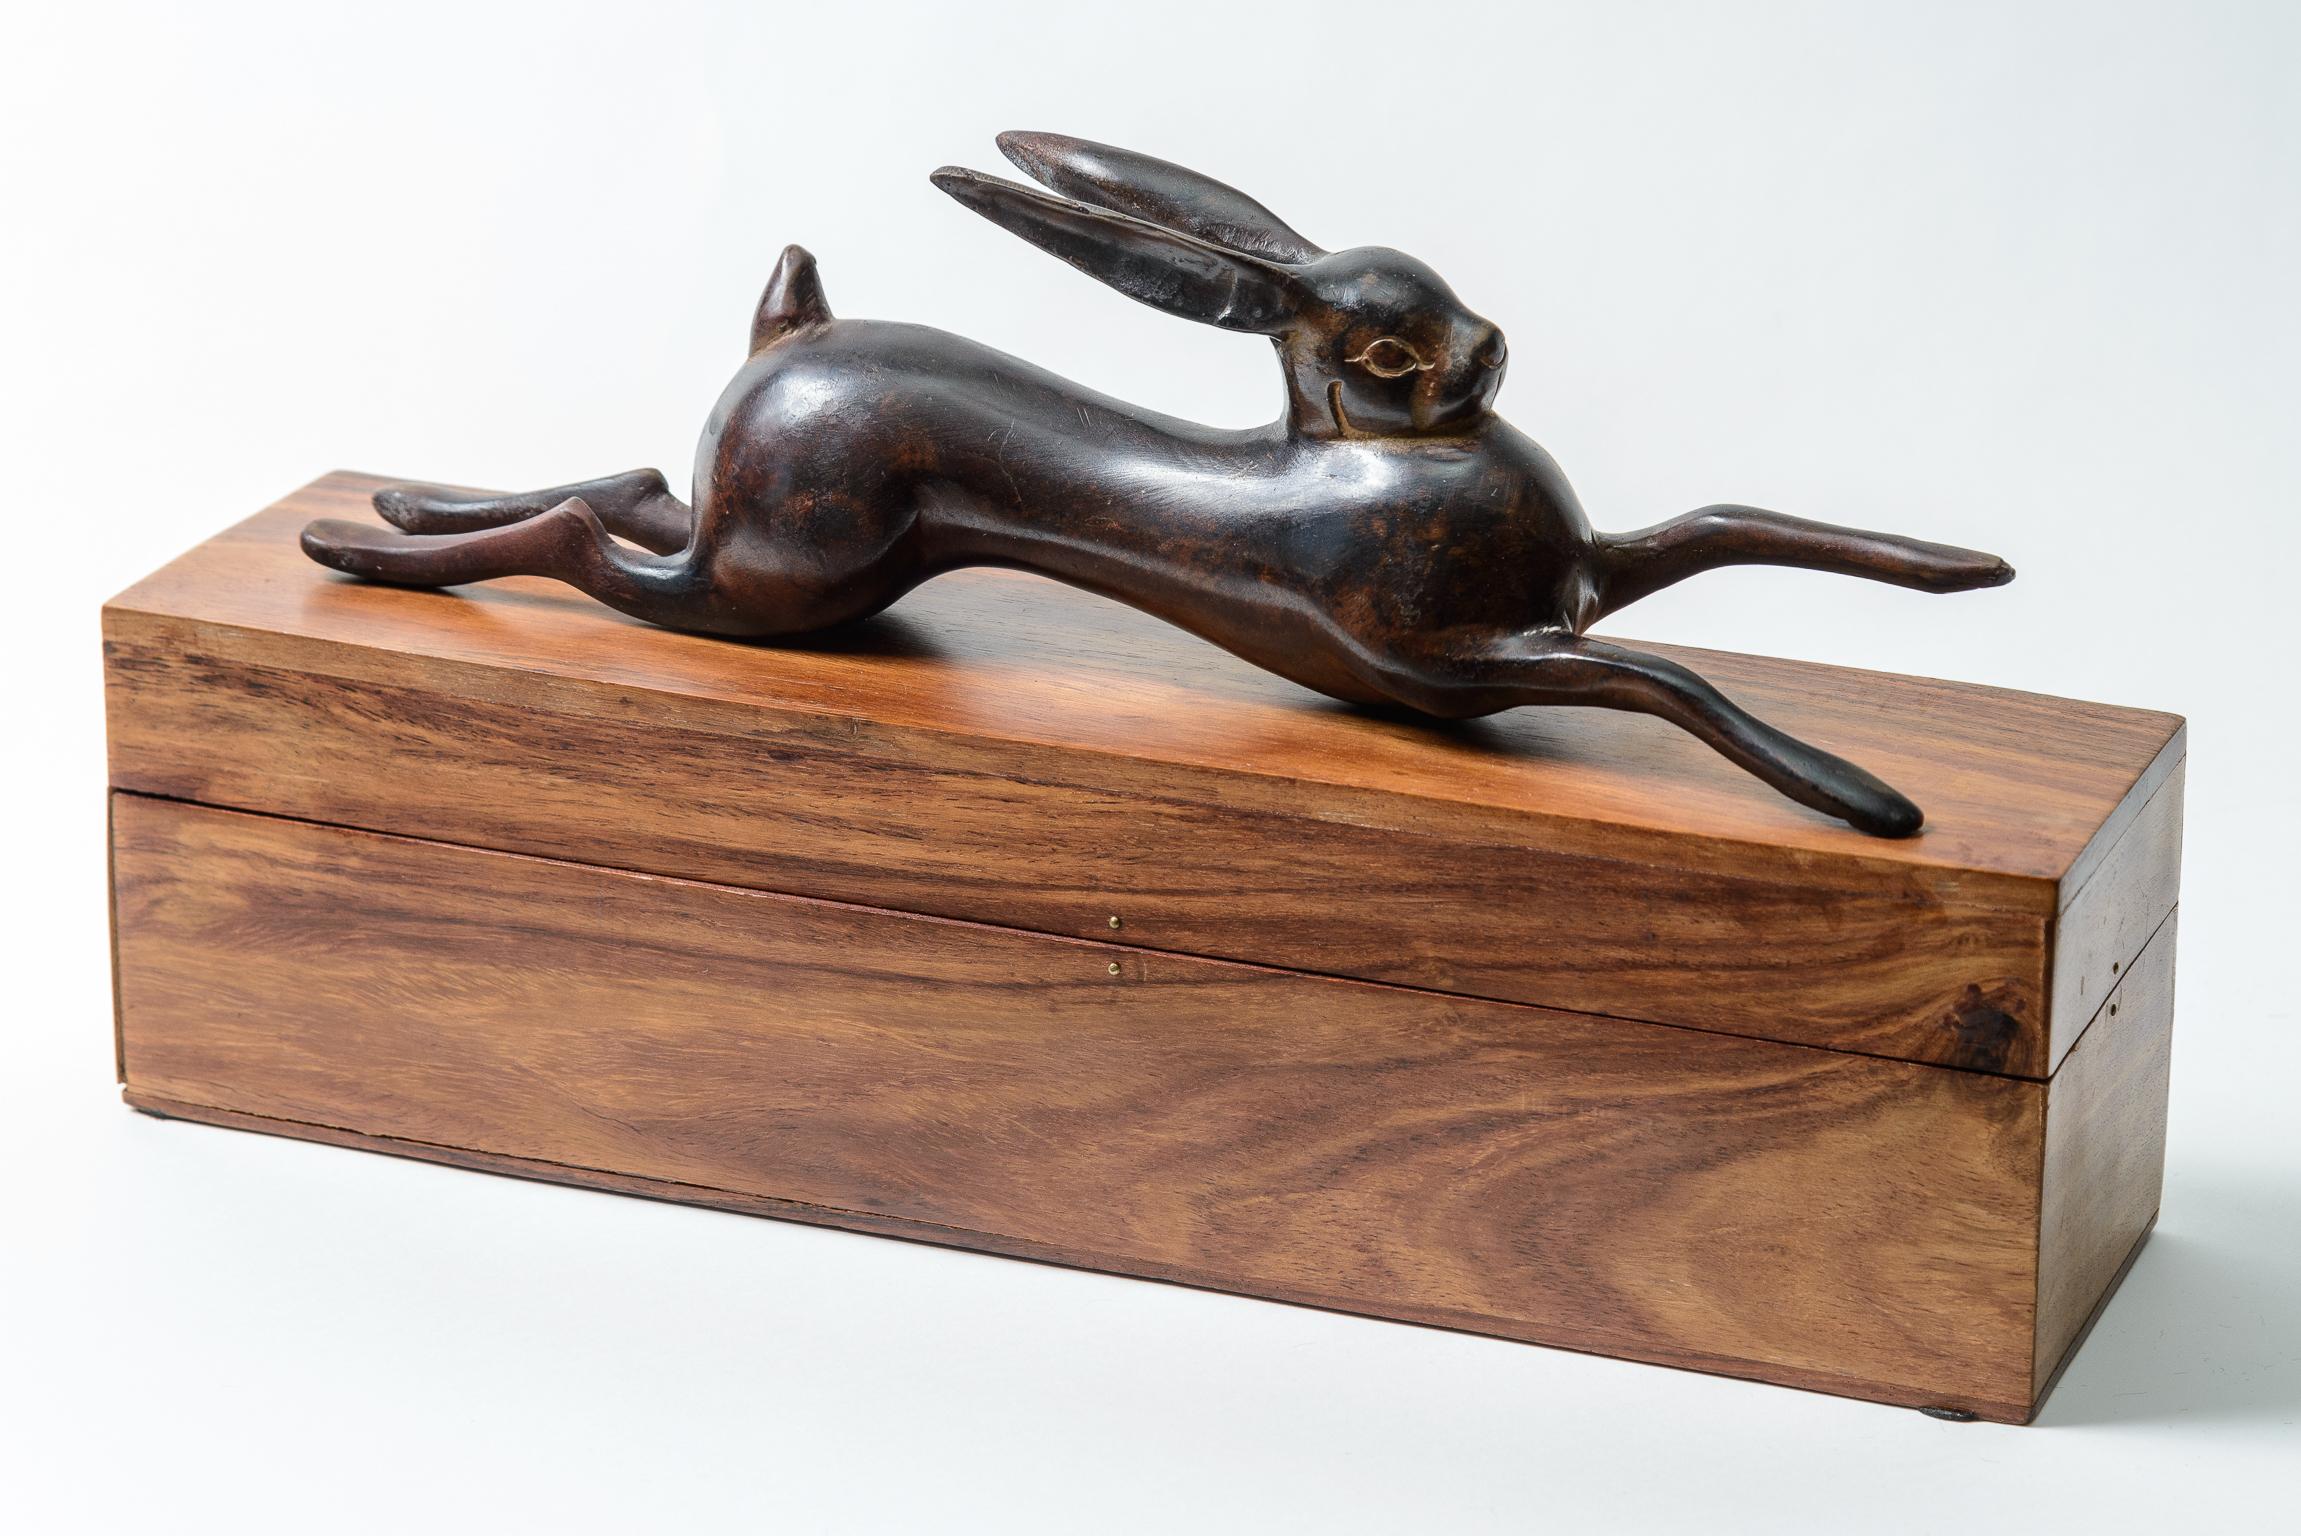 Patinated Metal and rosewood bunny box.
A well made whimsical table top accessory 